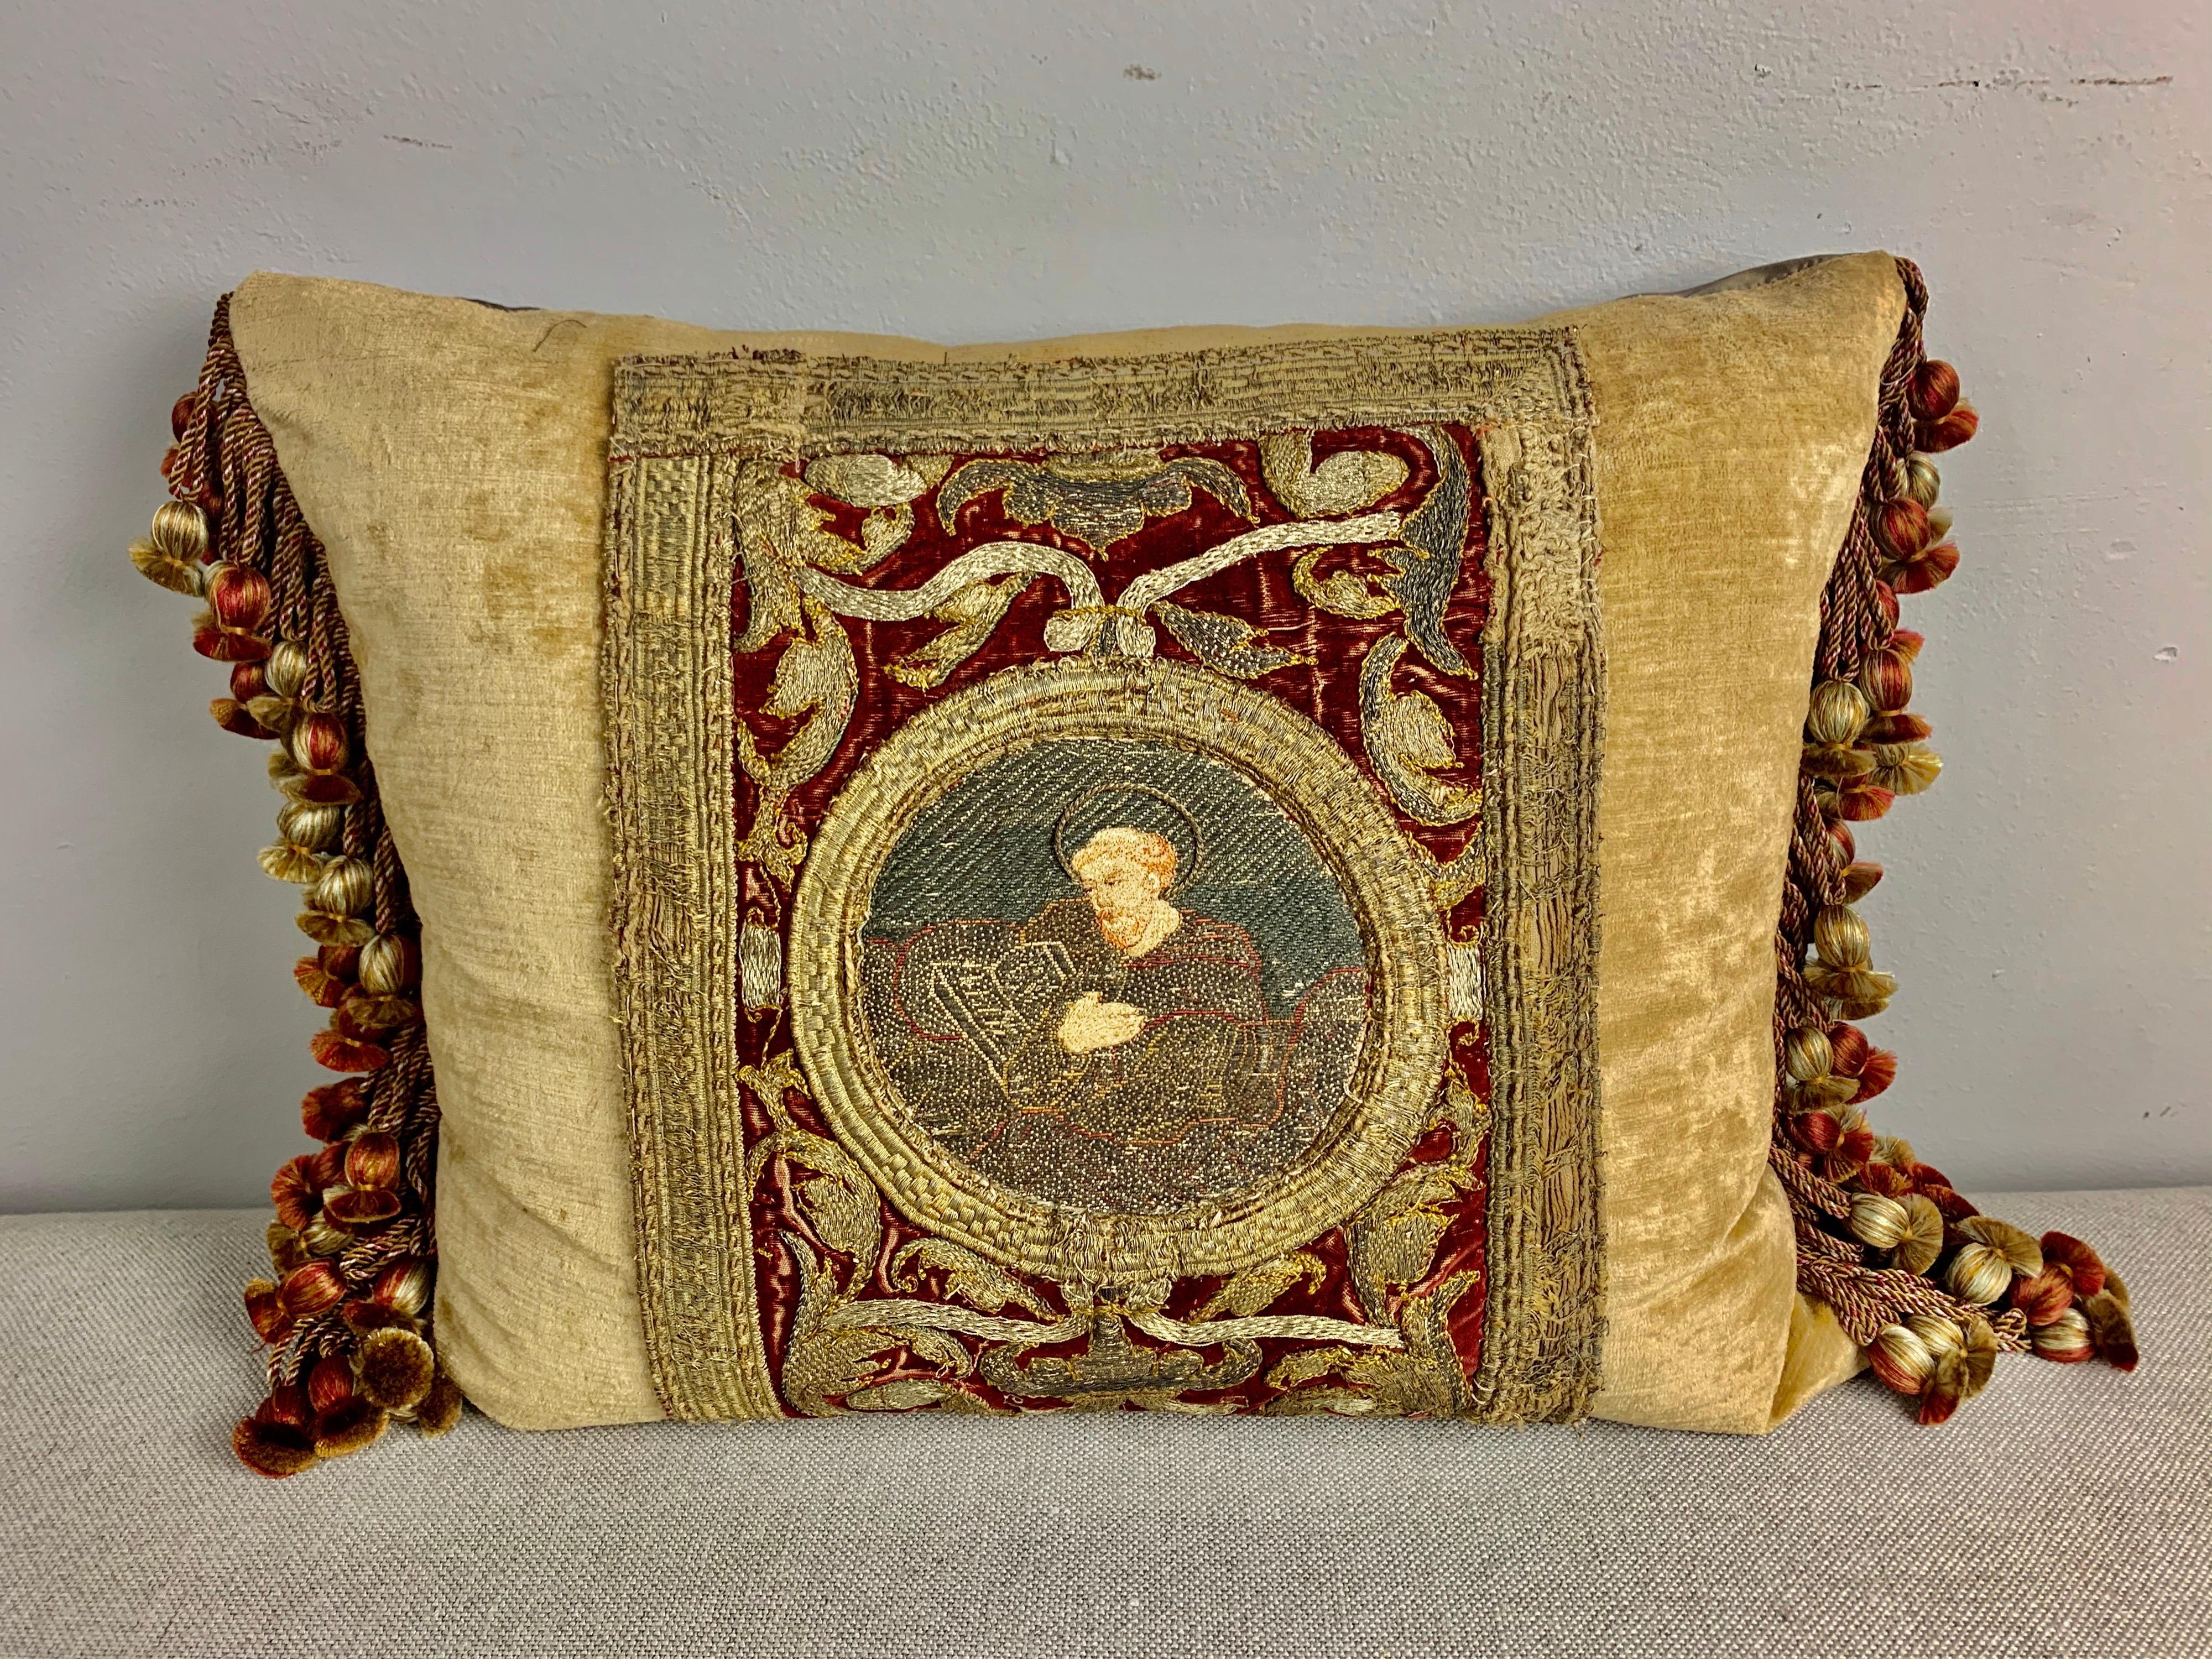 Pair of incredibly fine 18th century metallic and silk embroidered red and gold textile pillows. The pillows depict religious Apostles centered in cartouches and surrounded by more incredible embroidery throughout. Silk taffeta backs, multicolored